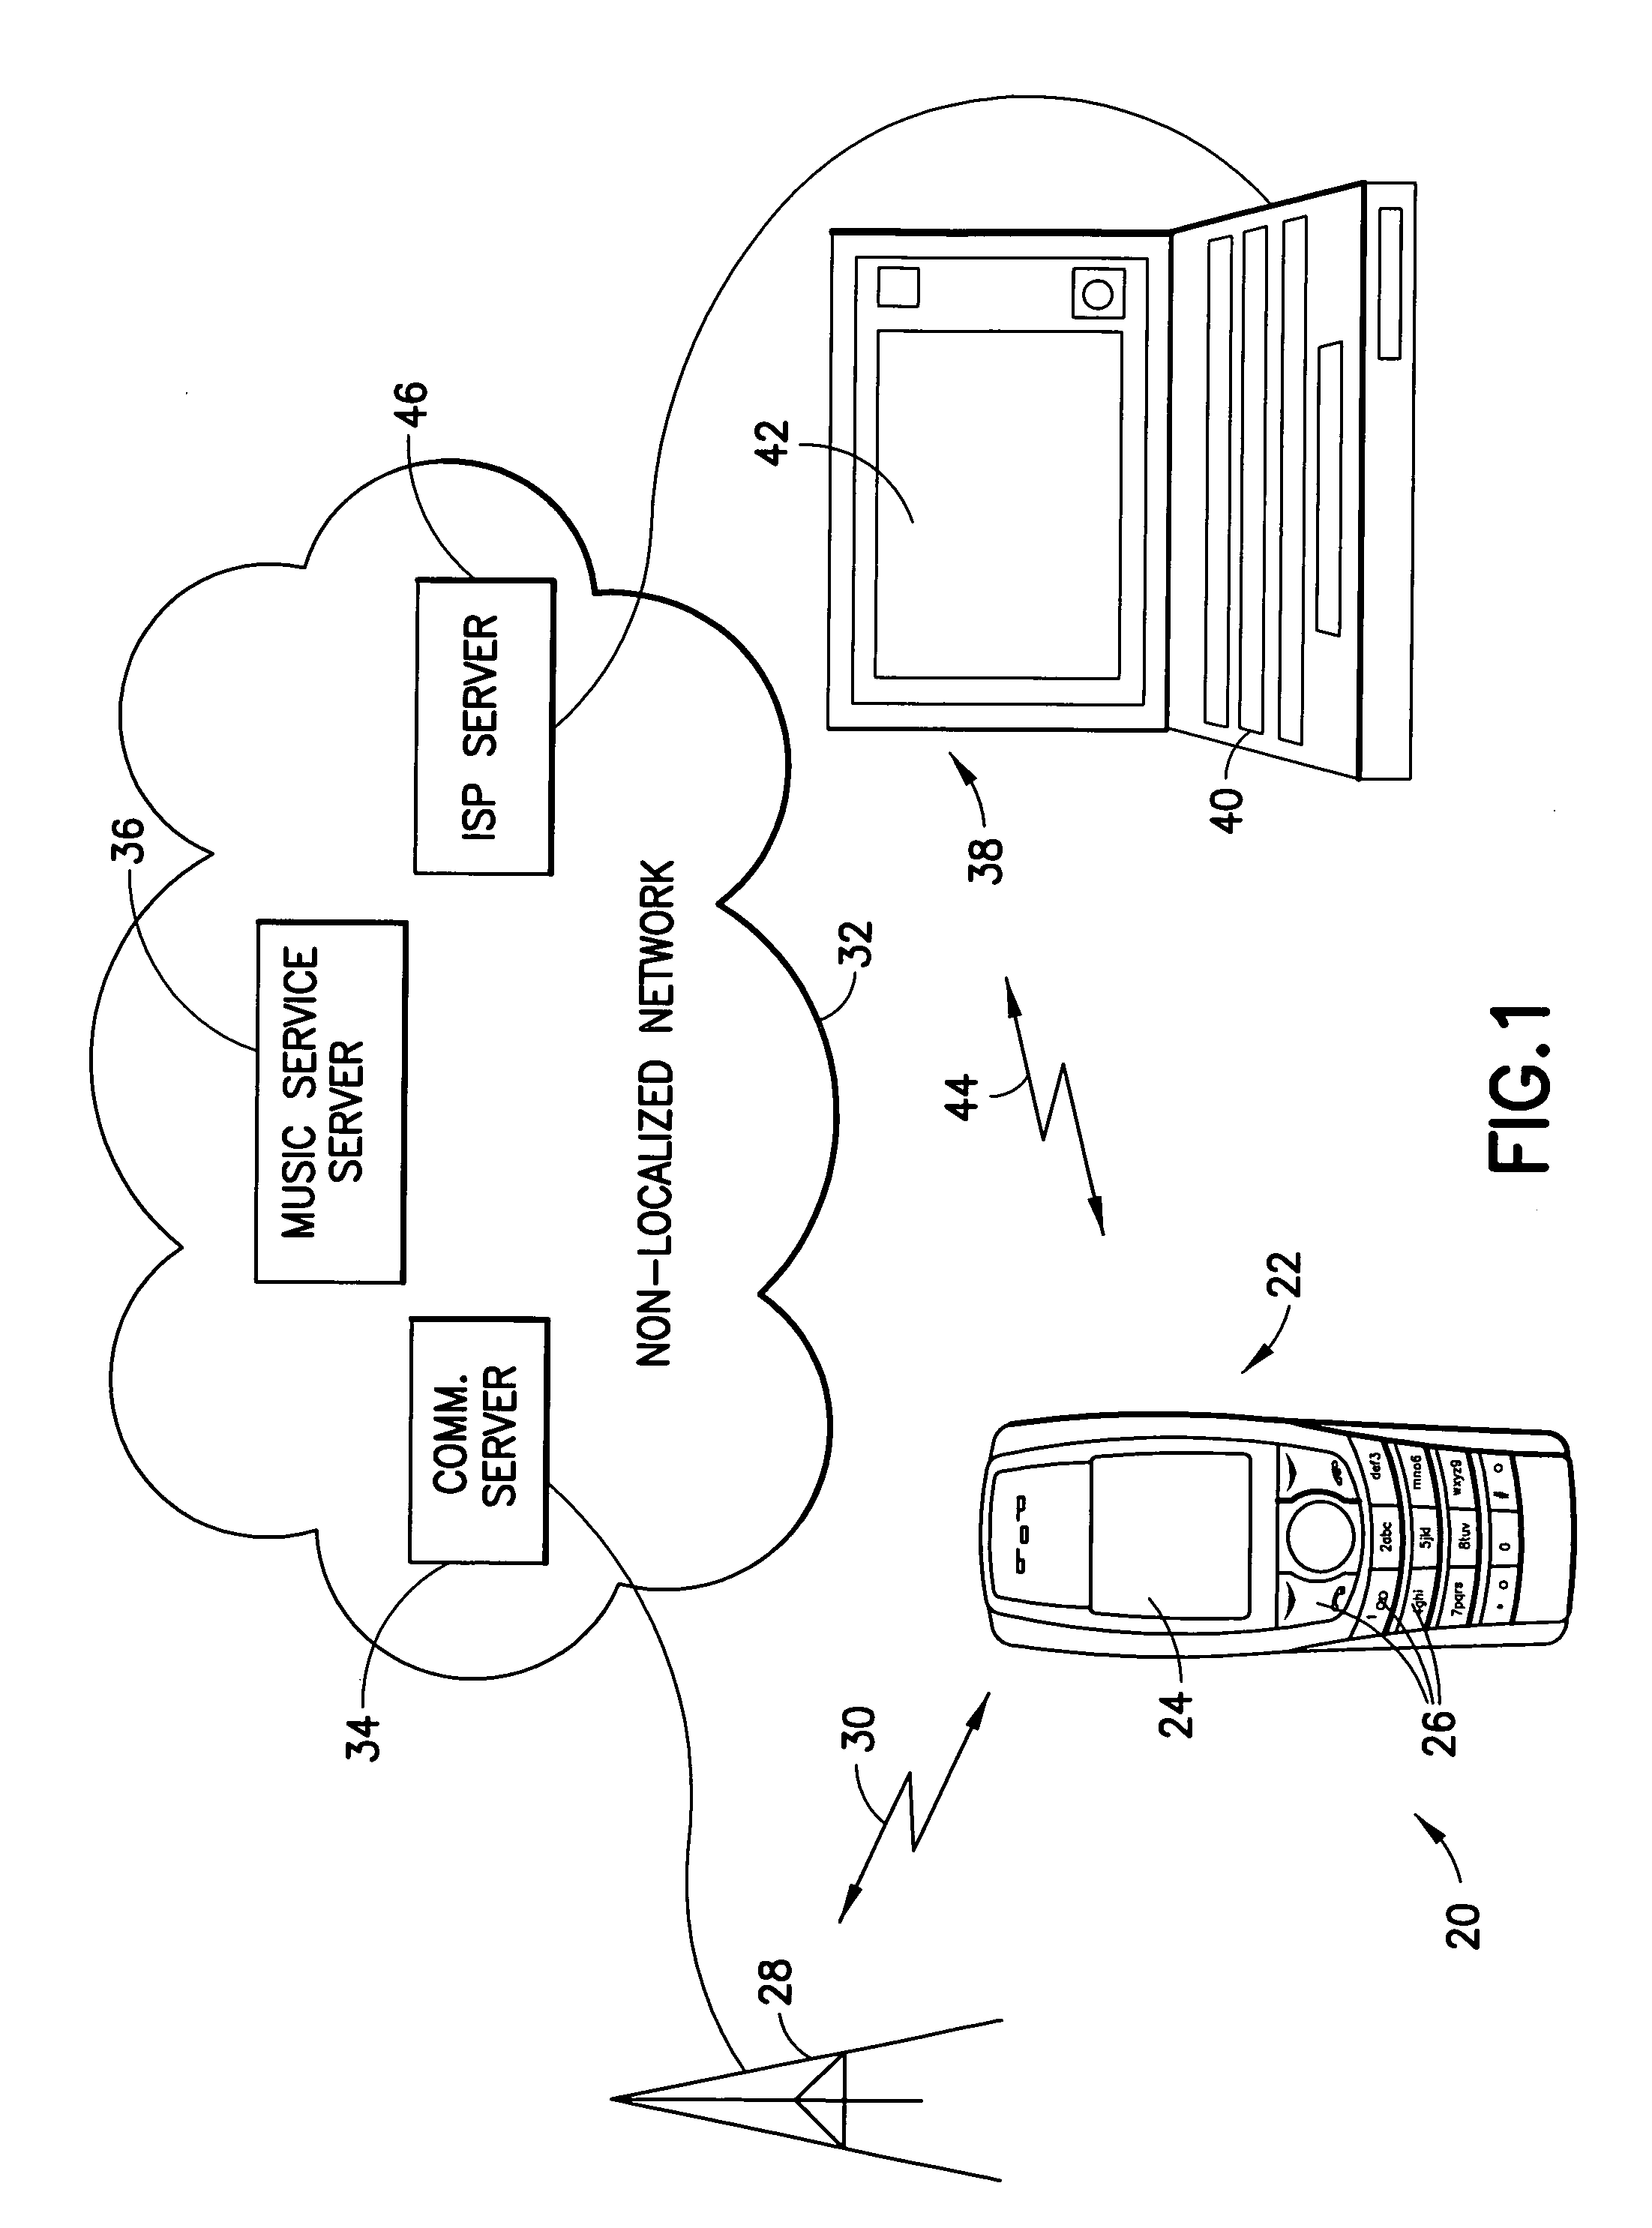 System and method for music synchronization in a mobile device